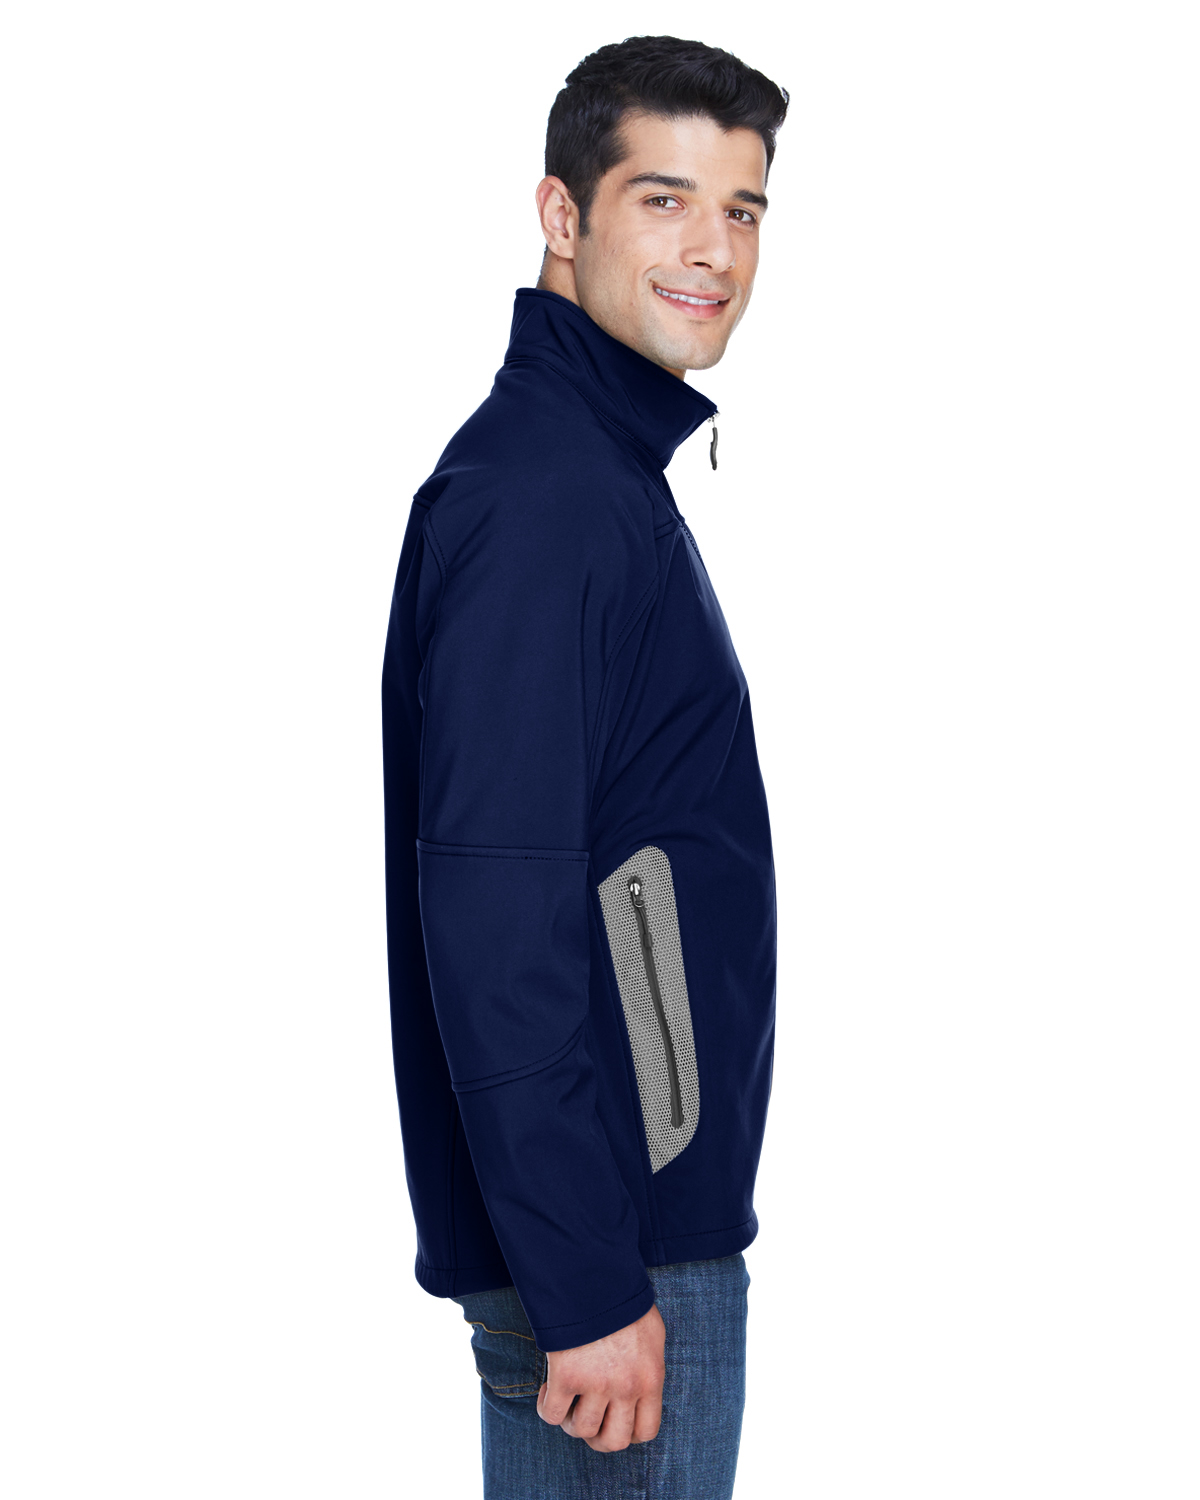 Men's Three-Layer Fleece Bonded Soft Shell Technical Jacket - CLASSIC NAVY - S - image 3 of 3